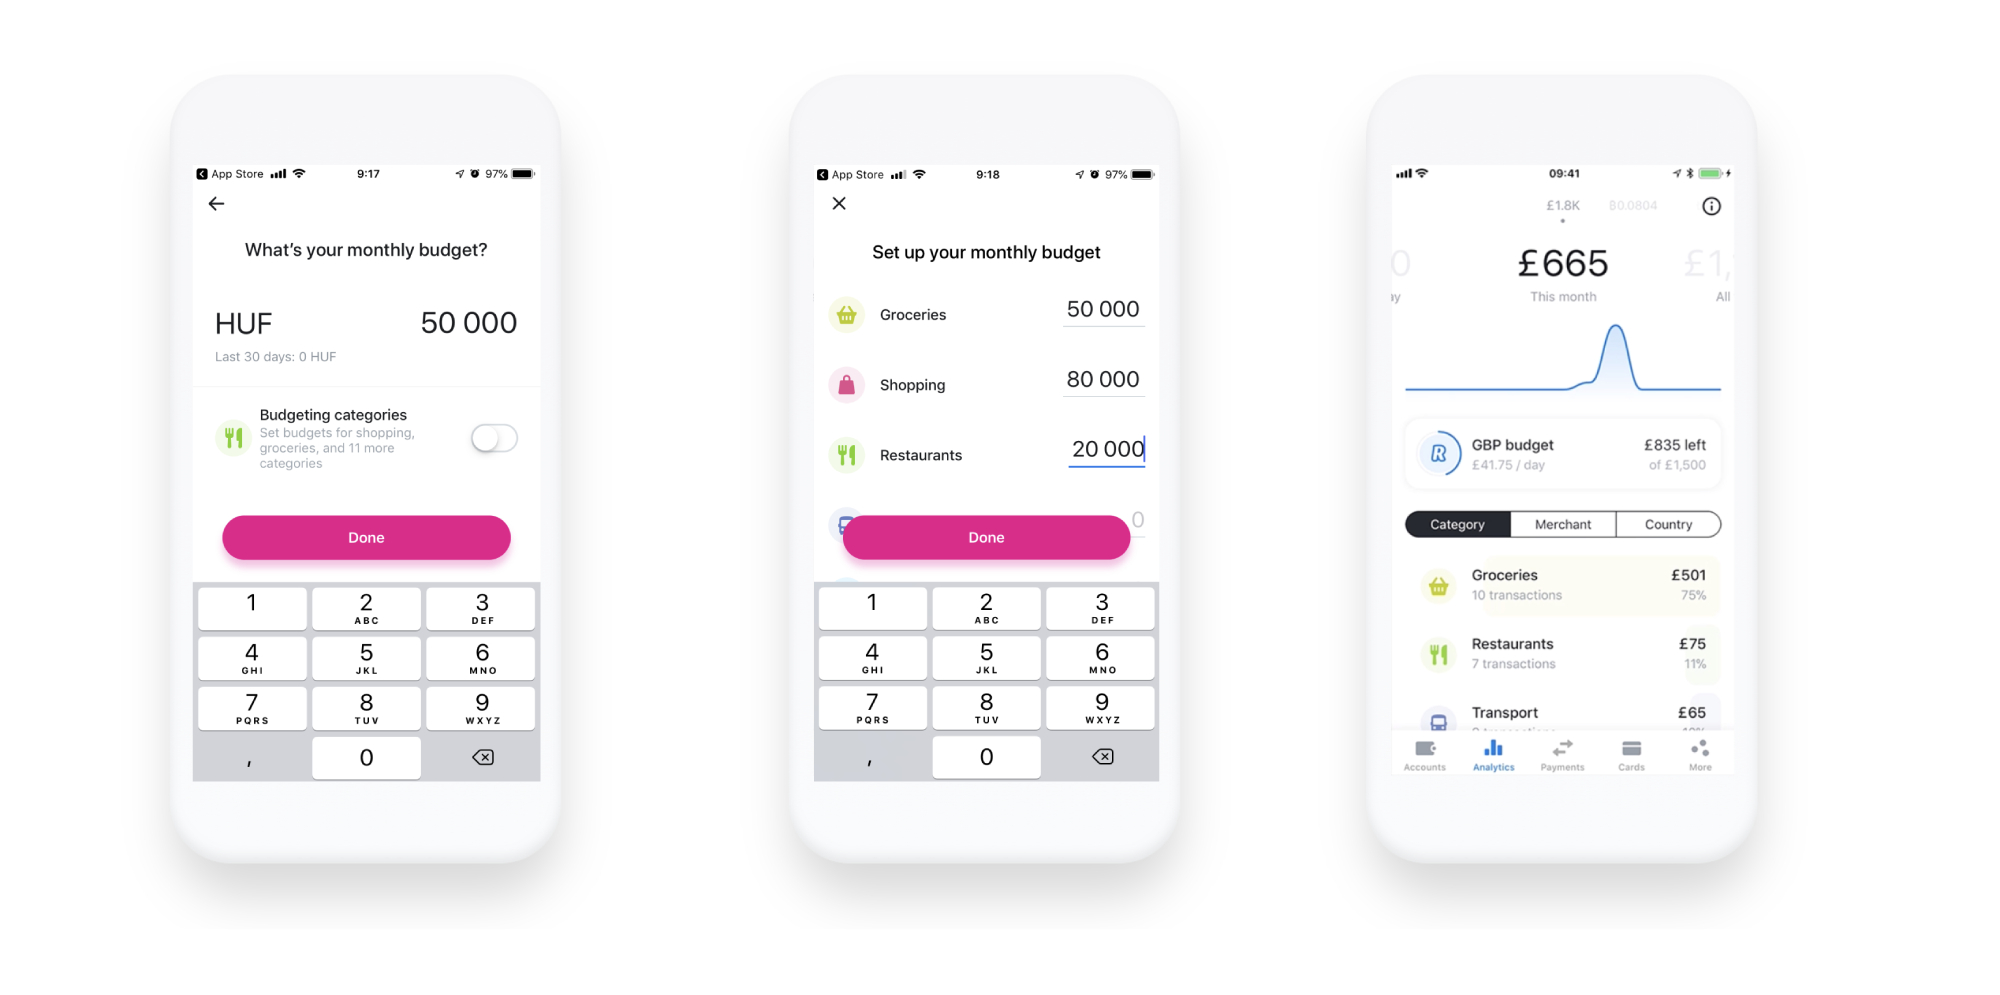 Revolut's budgeting feature